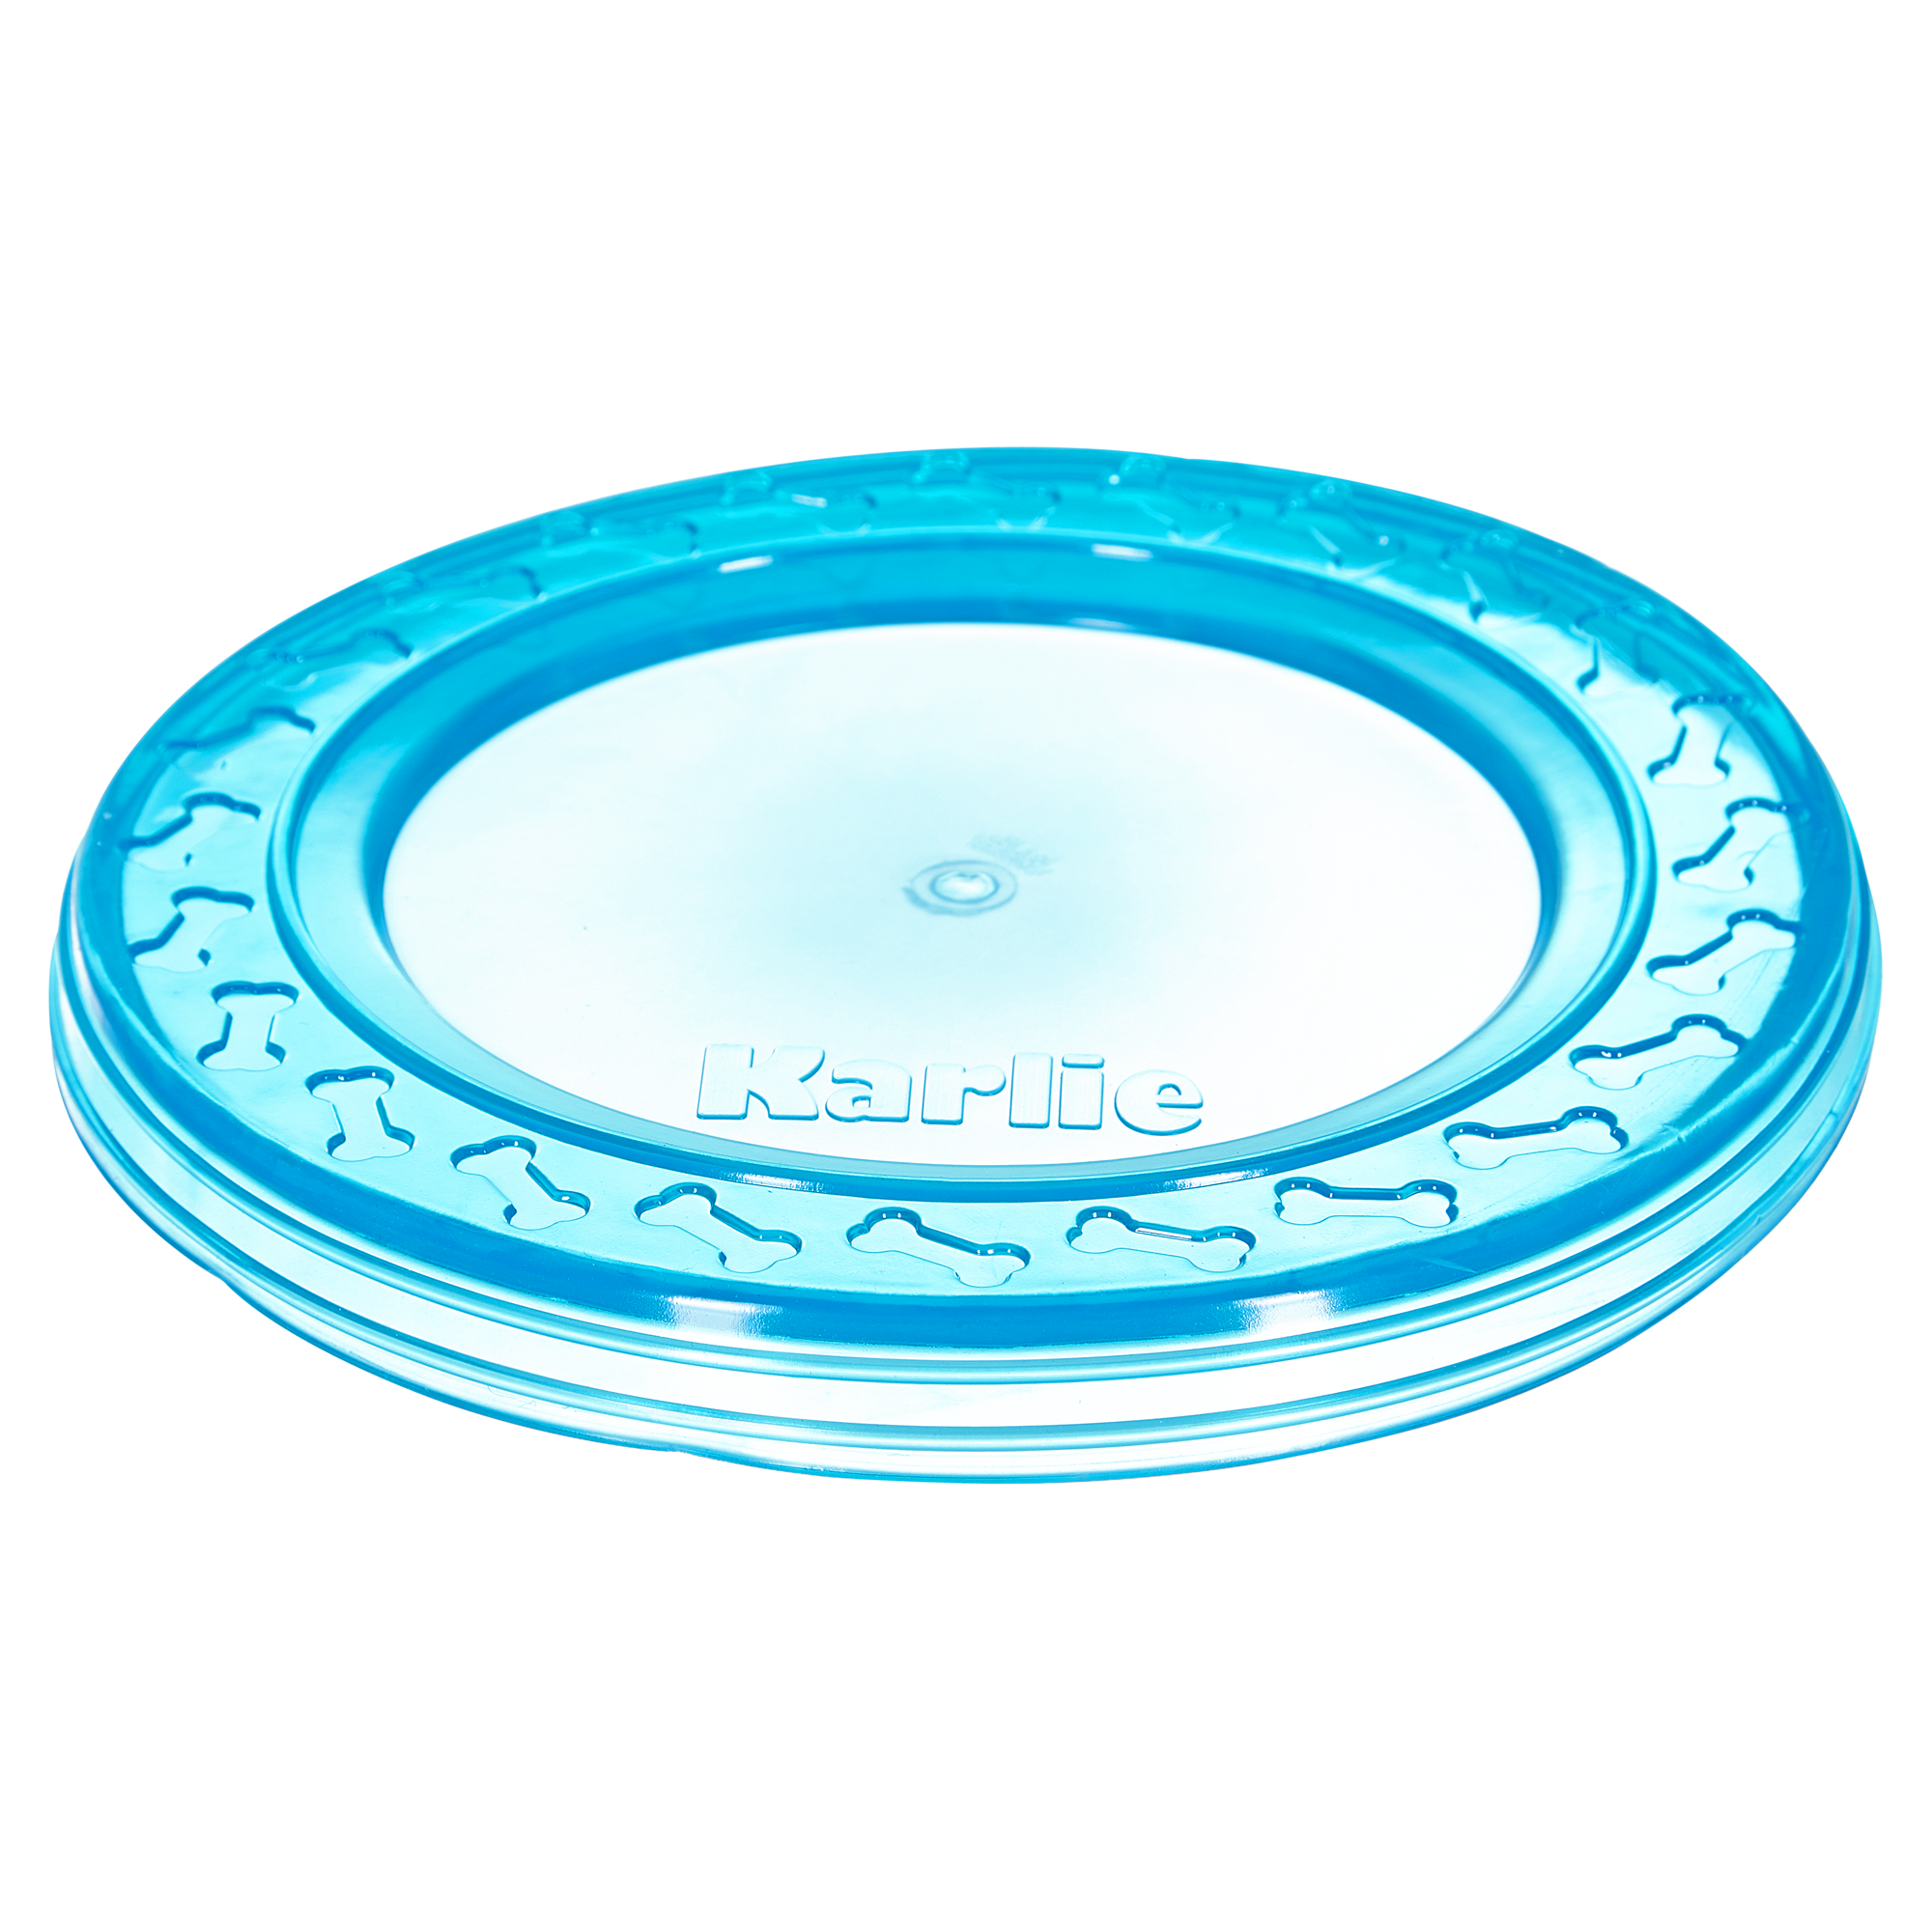 Hundespielzeug "Flying Frisbee" Gummi Ø 23 cm + product picture